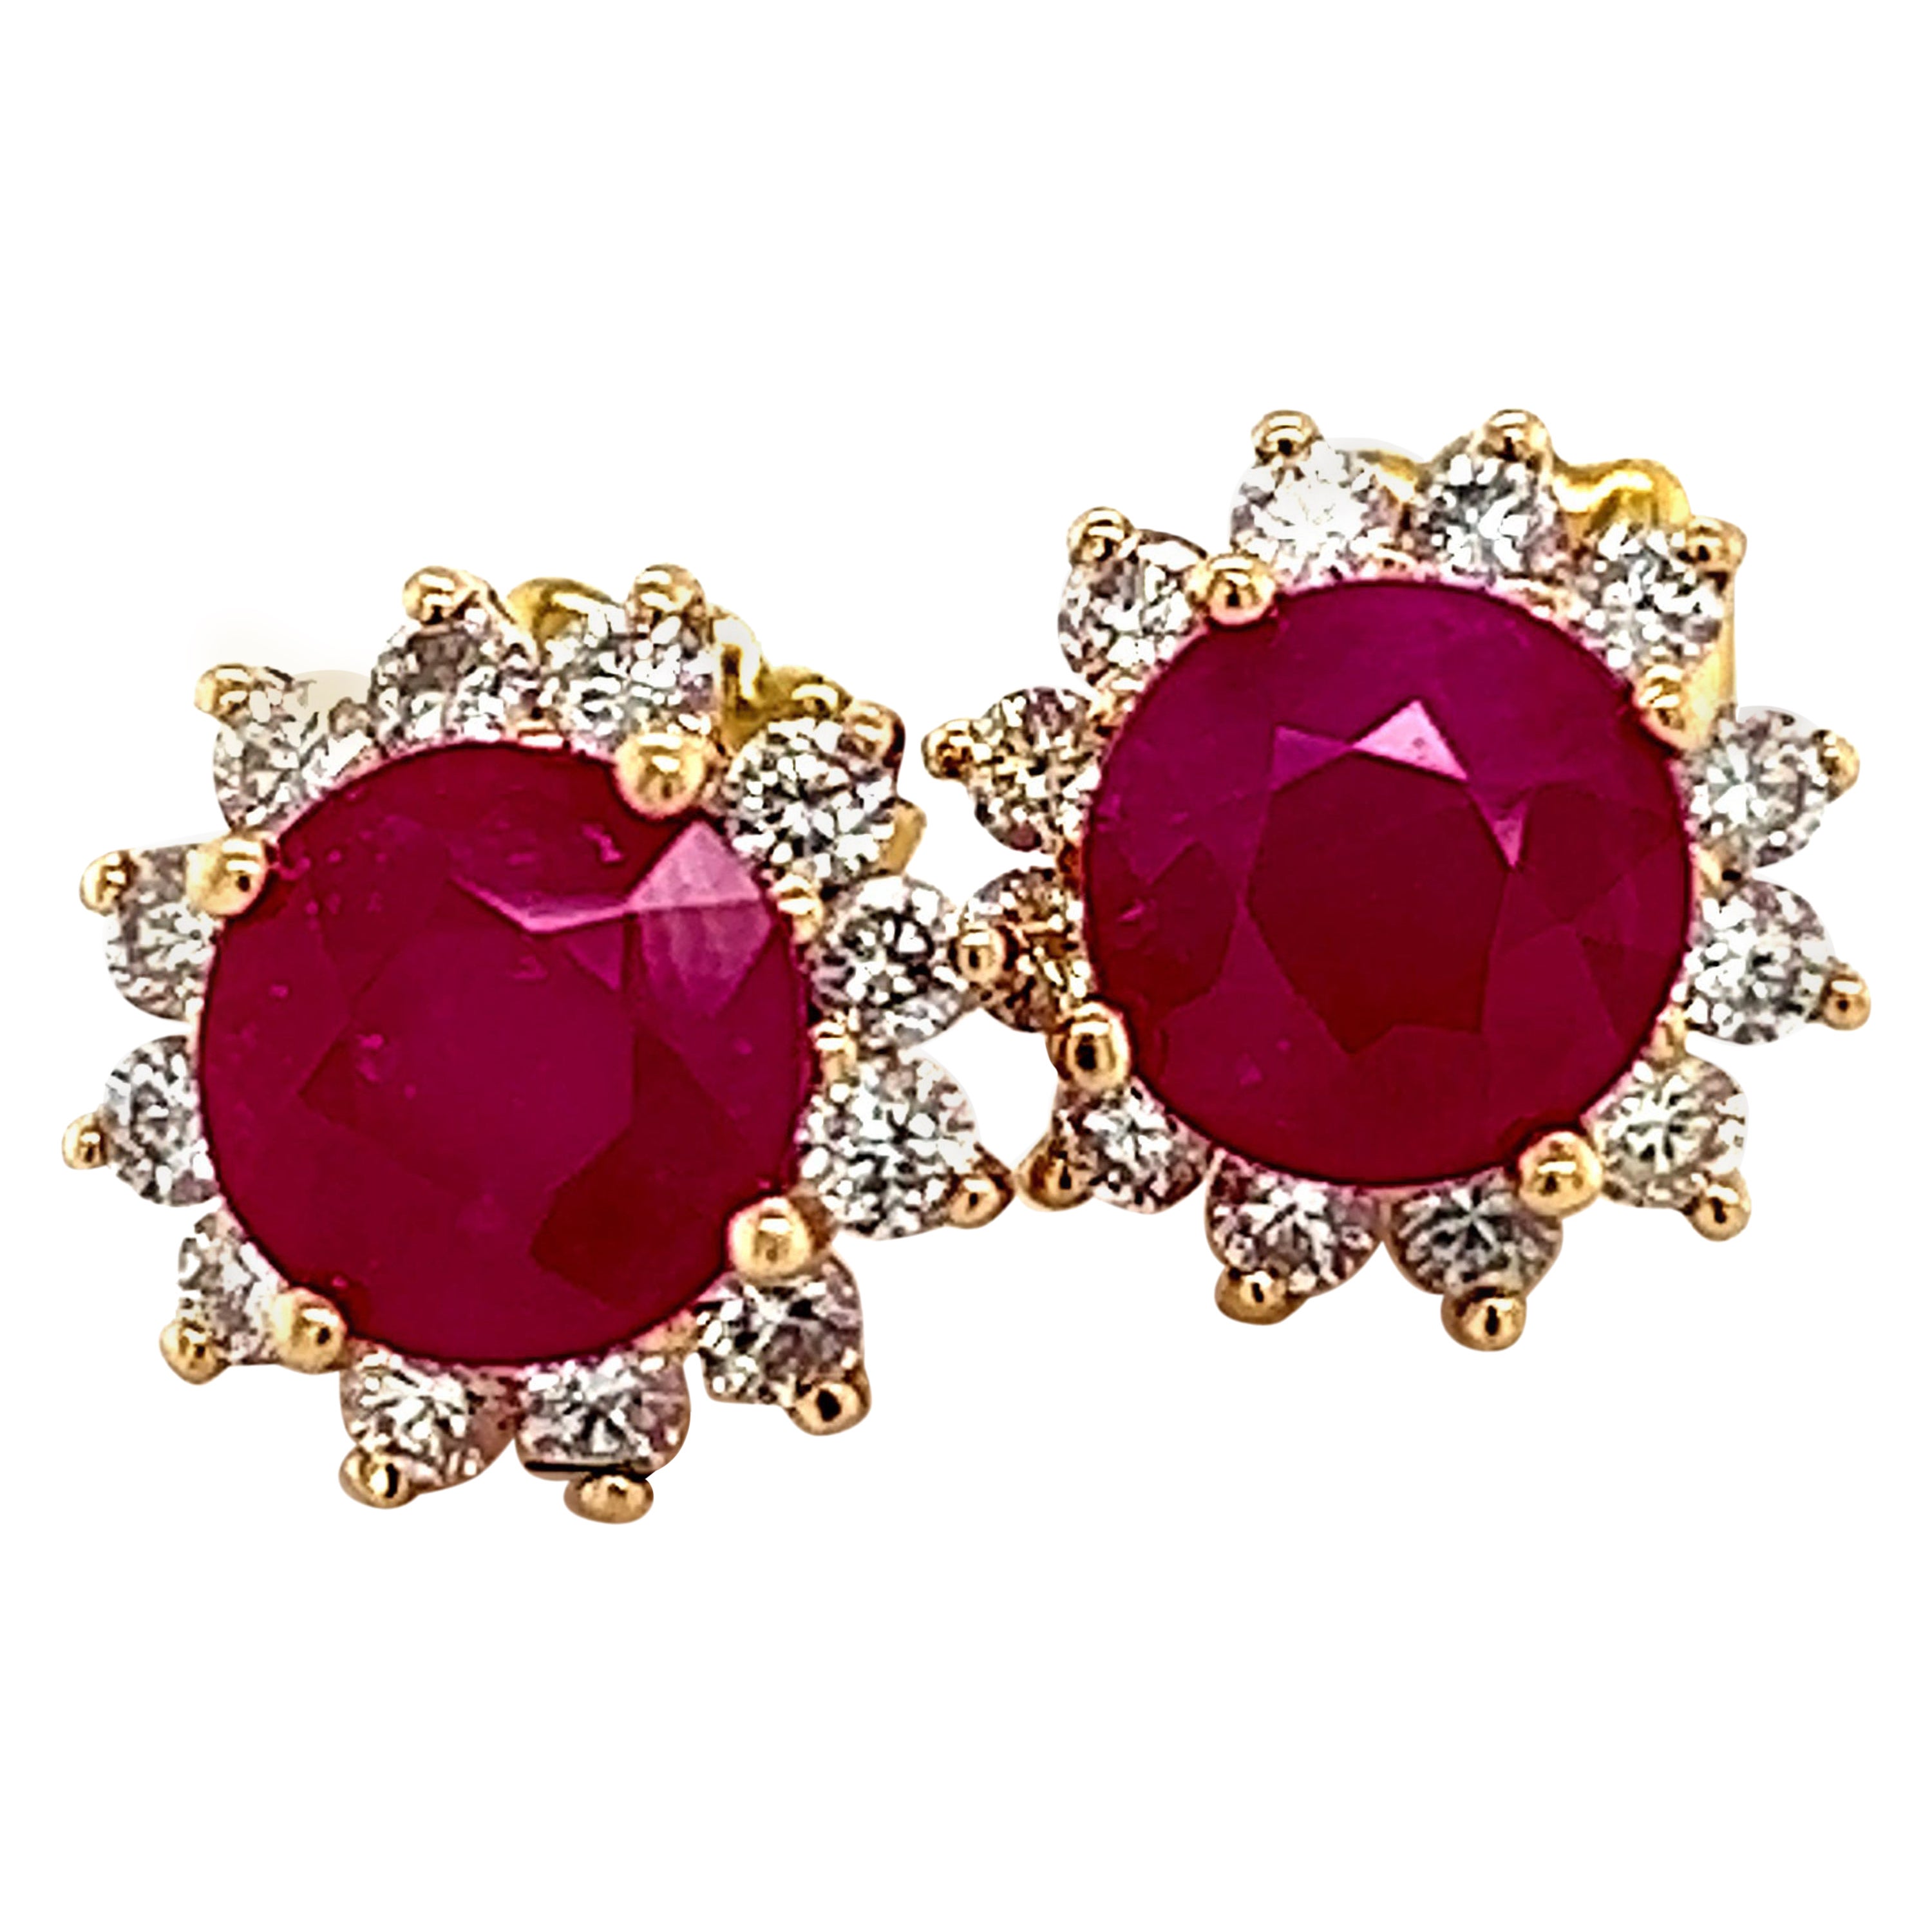 Natural Ruby Diamond Earrings 14k Gold 3.72 TCW Certified For Sale